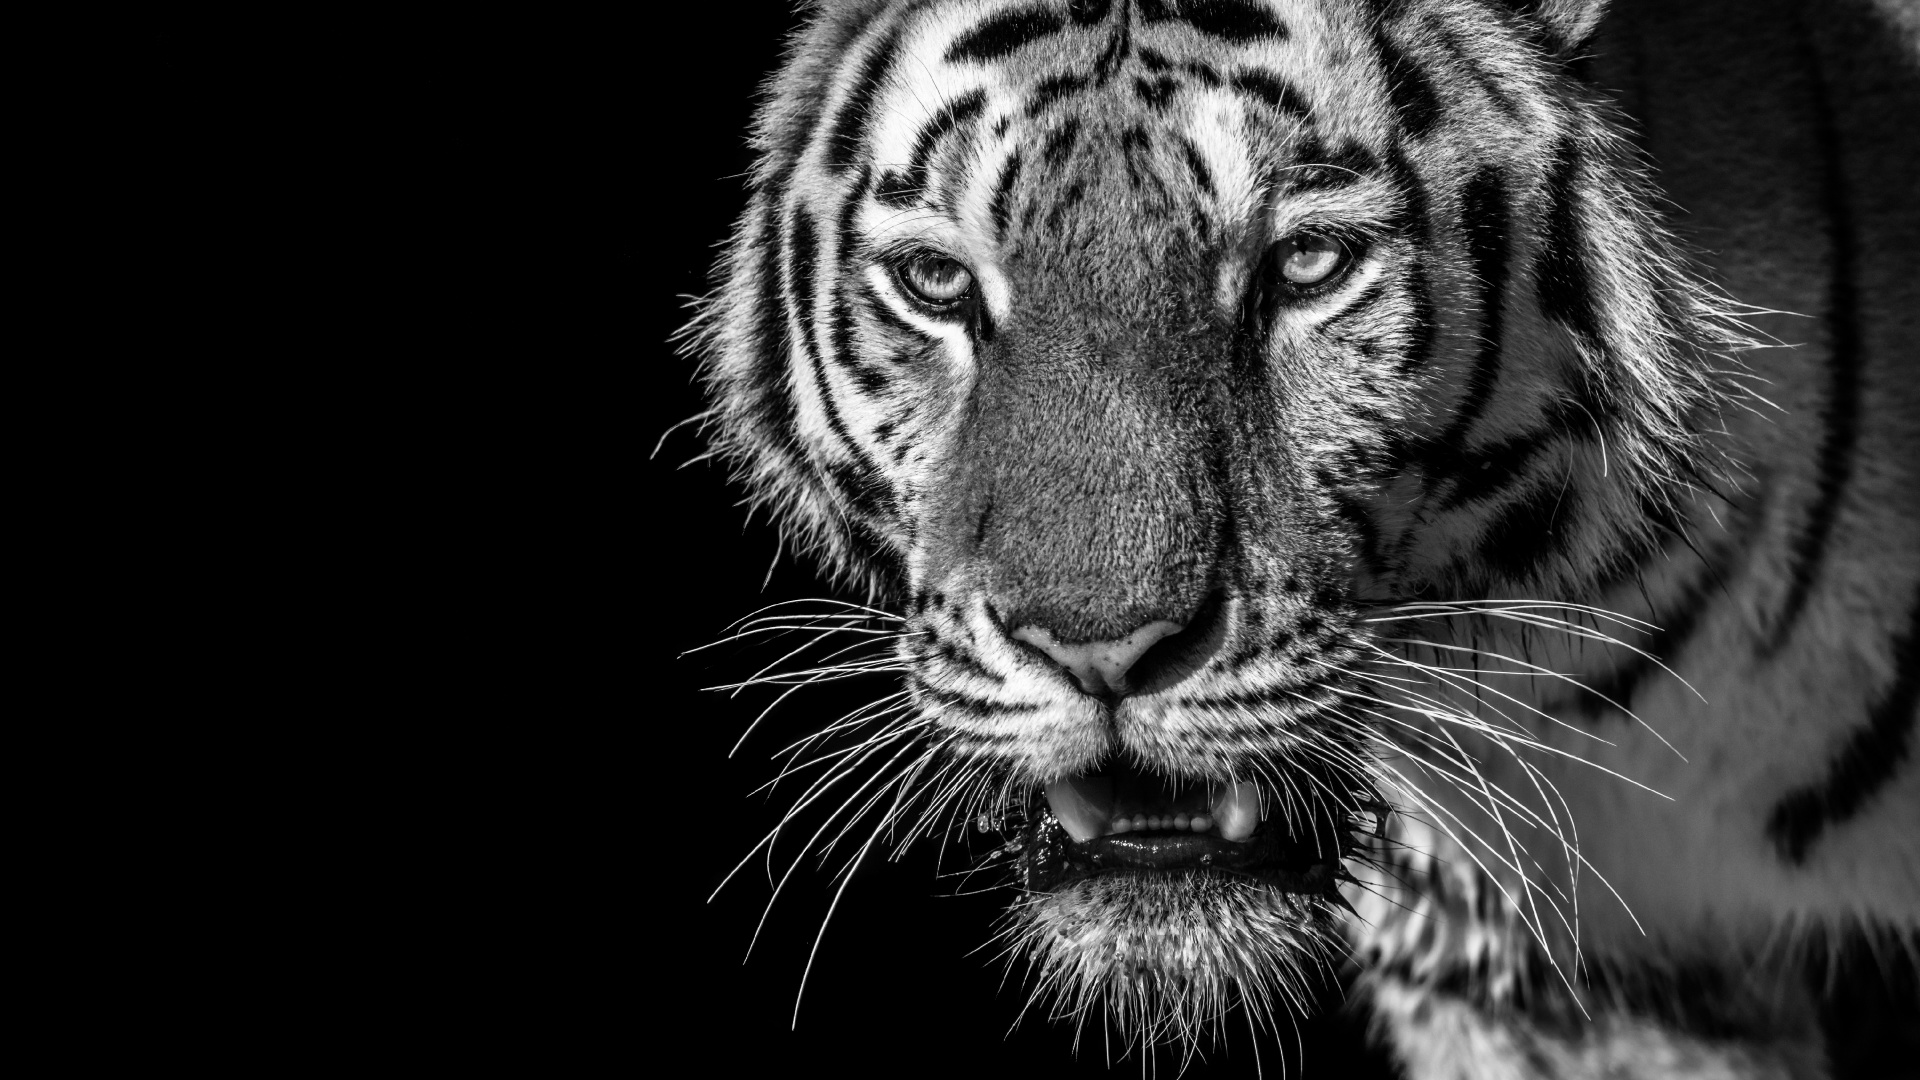 White and Black Tiger Illustration. Wallpaper in 1920x1080 Resolution